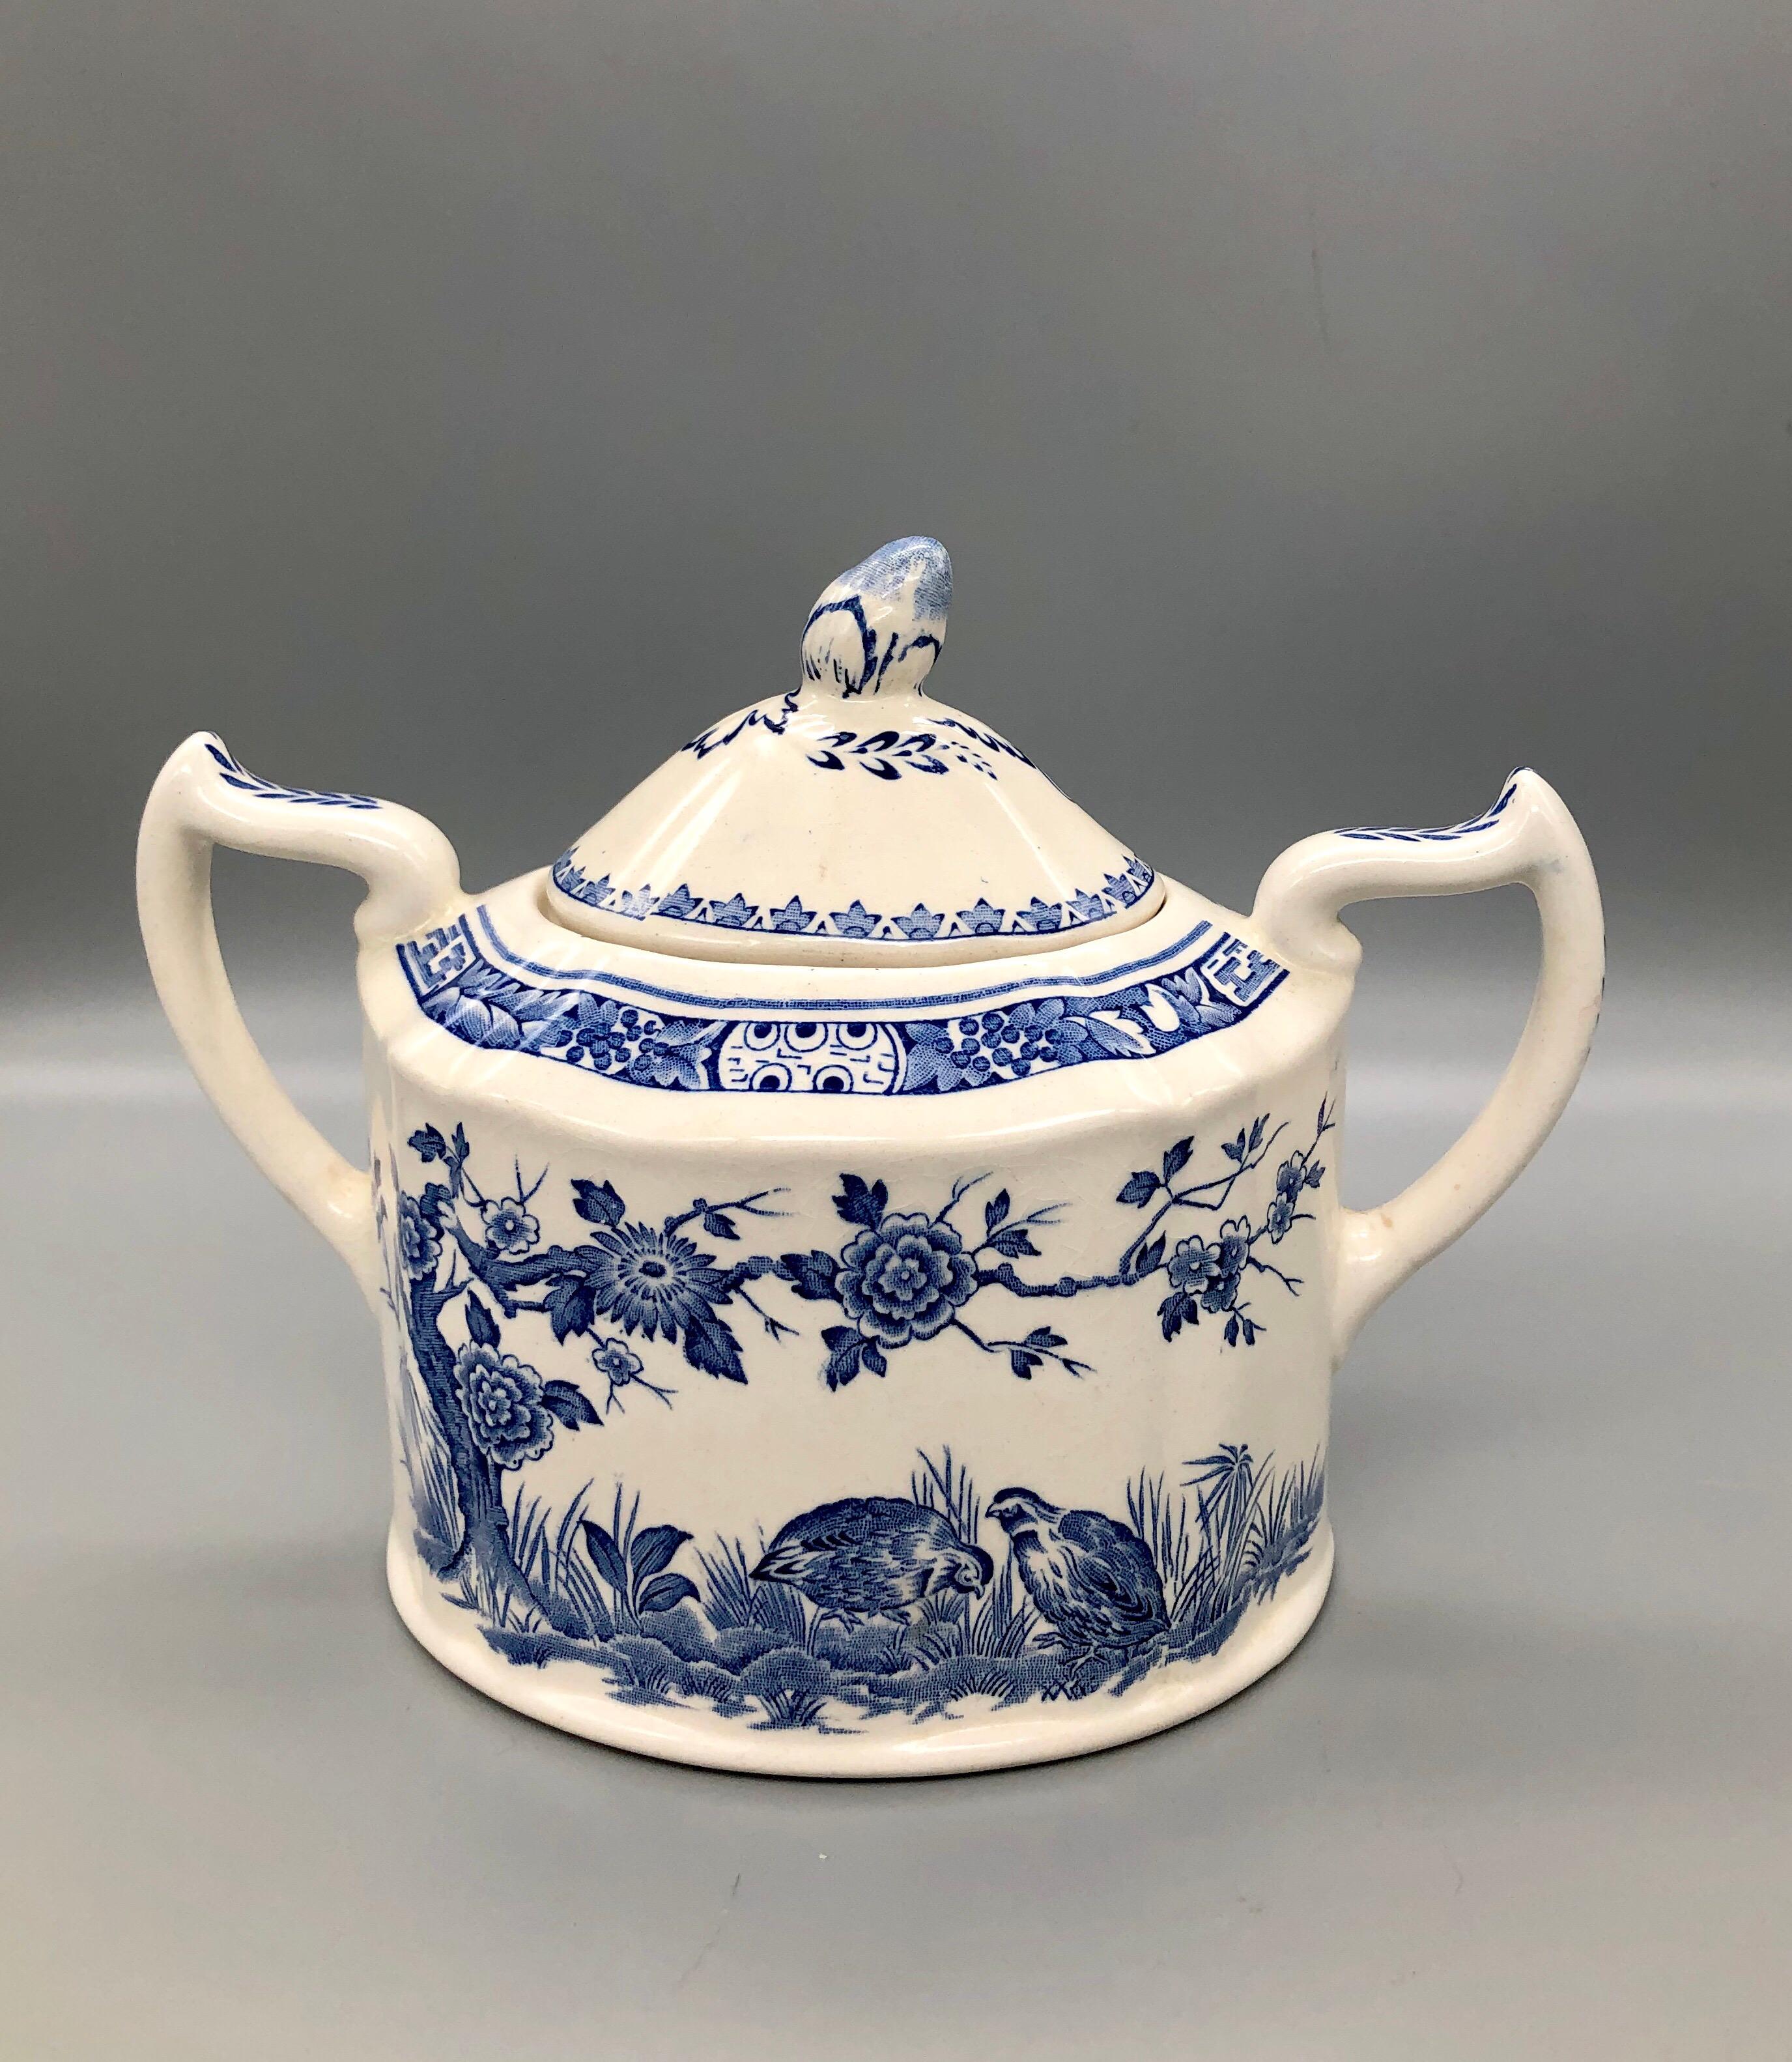 Blue and White Furnivals Quail 1913 Pottery Teapot, Creamer and Sugar Bowl Set In Good Condition For Sale In Vineyard Haven, MA